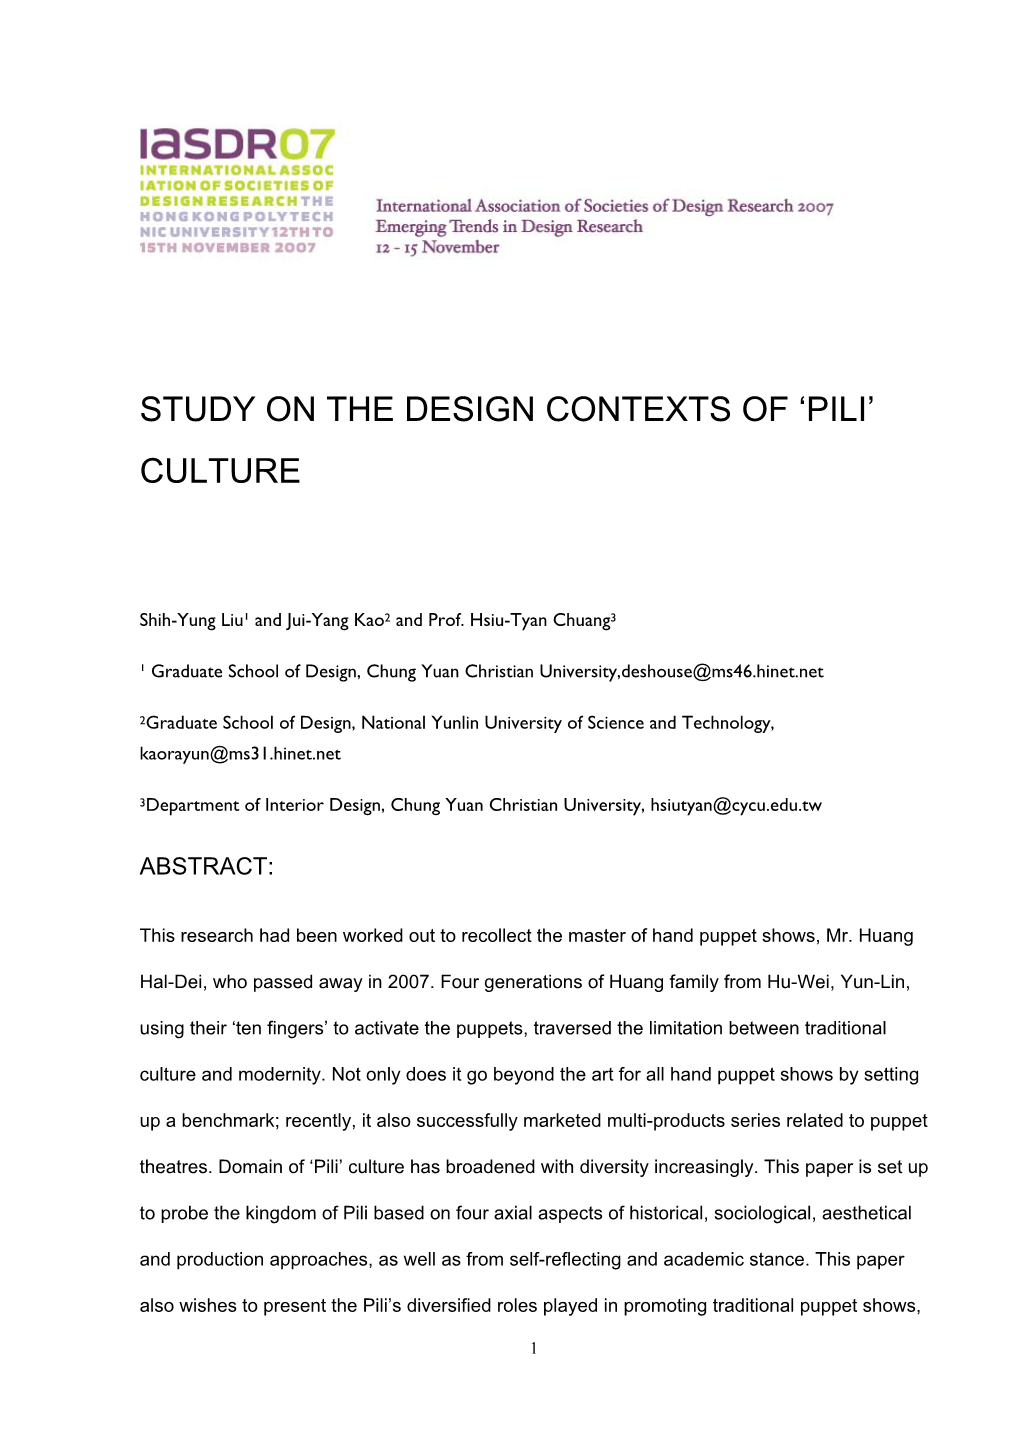 Study on the Design Contexts of 'Pili' Culture